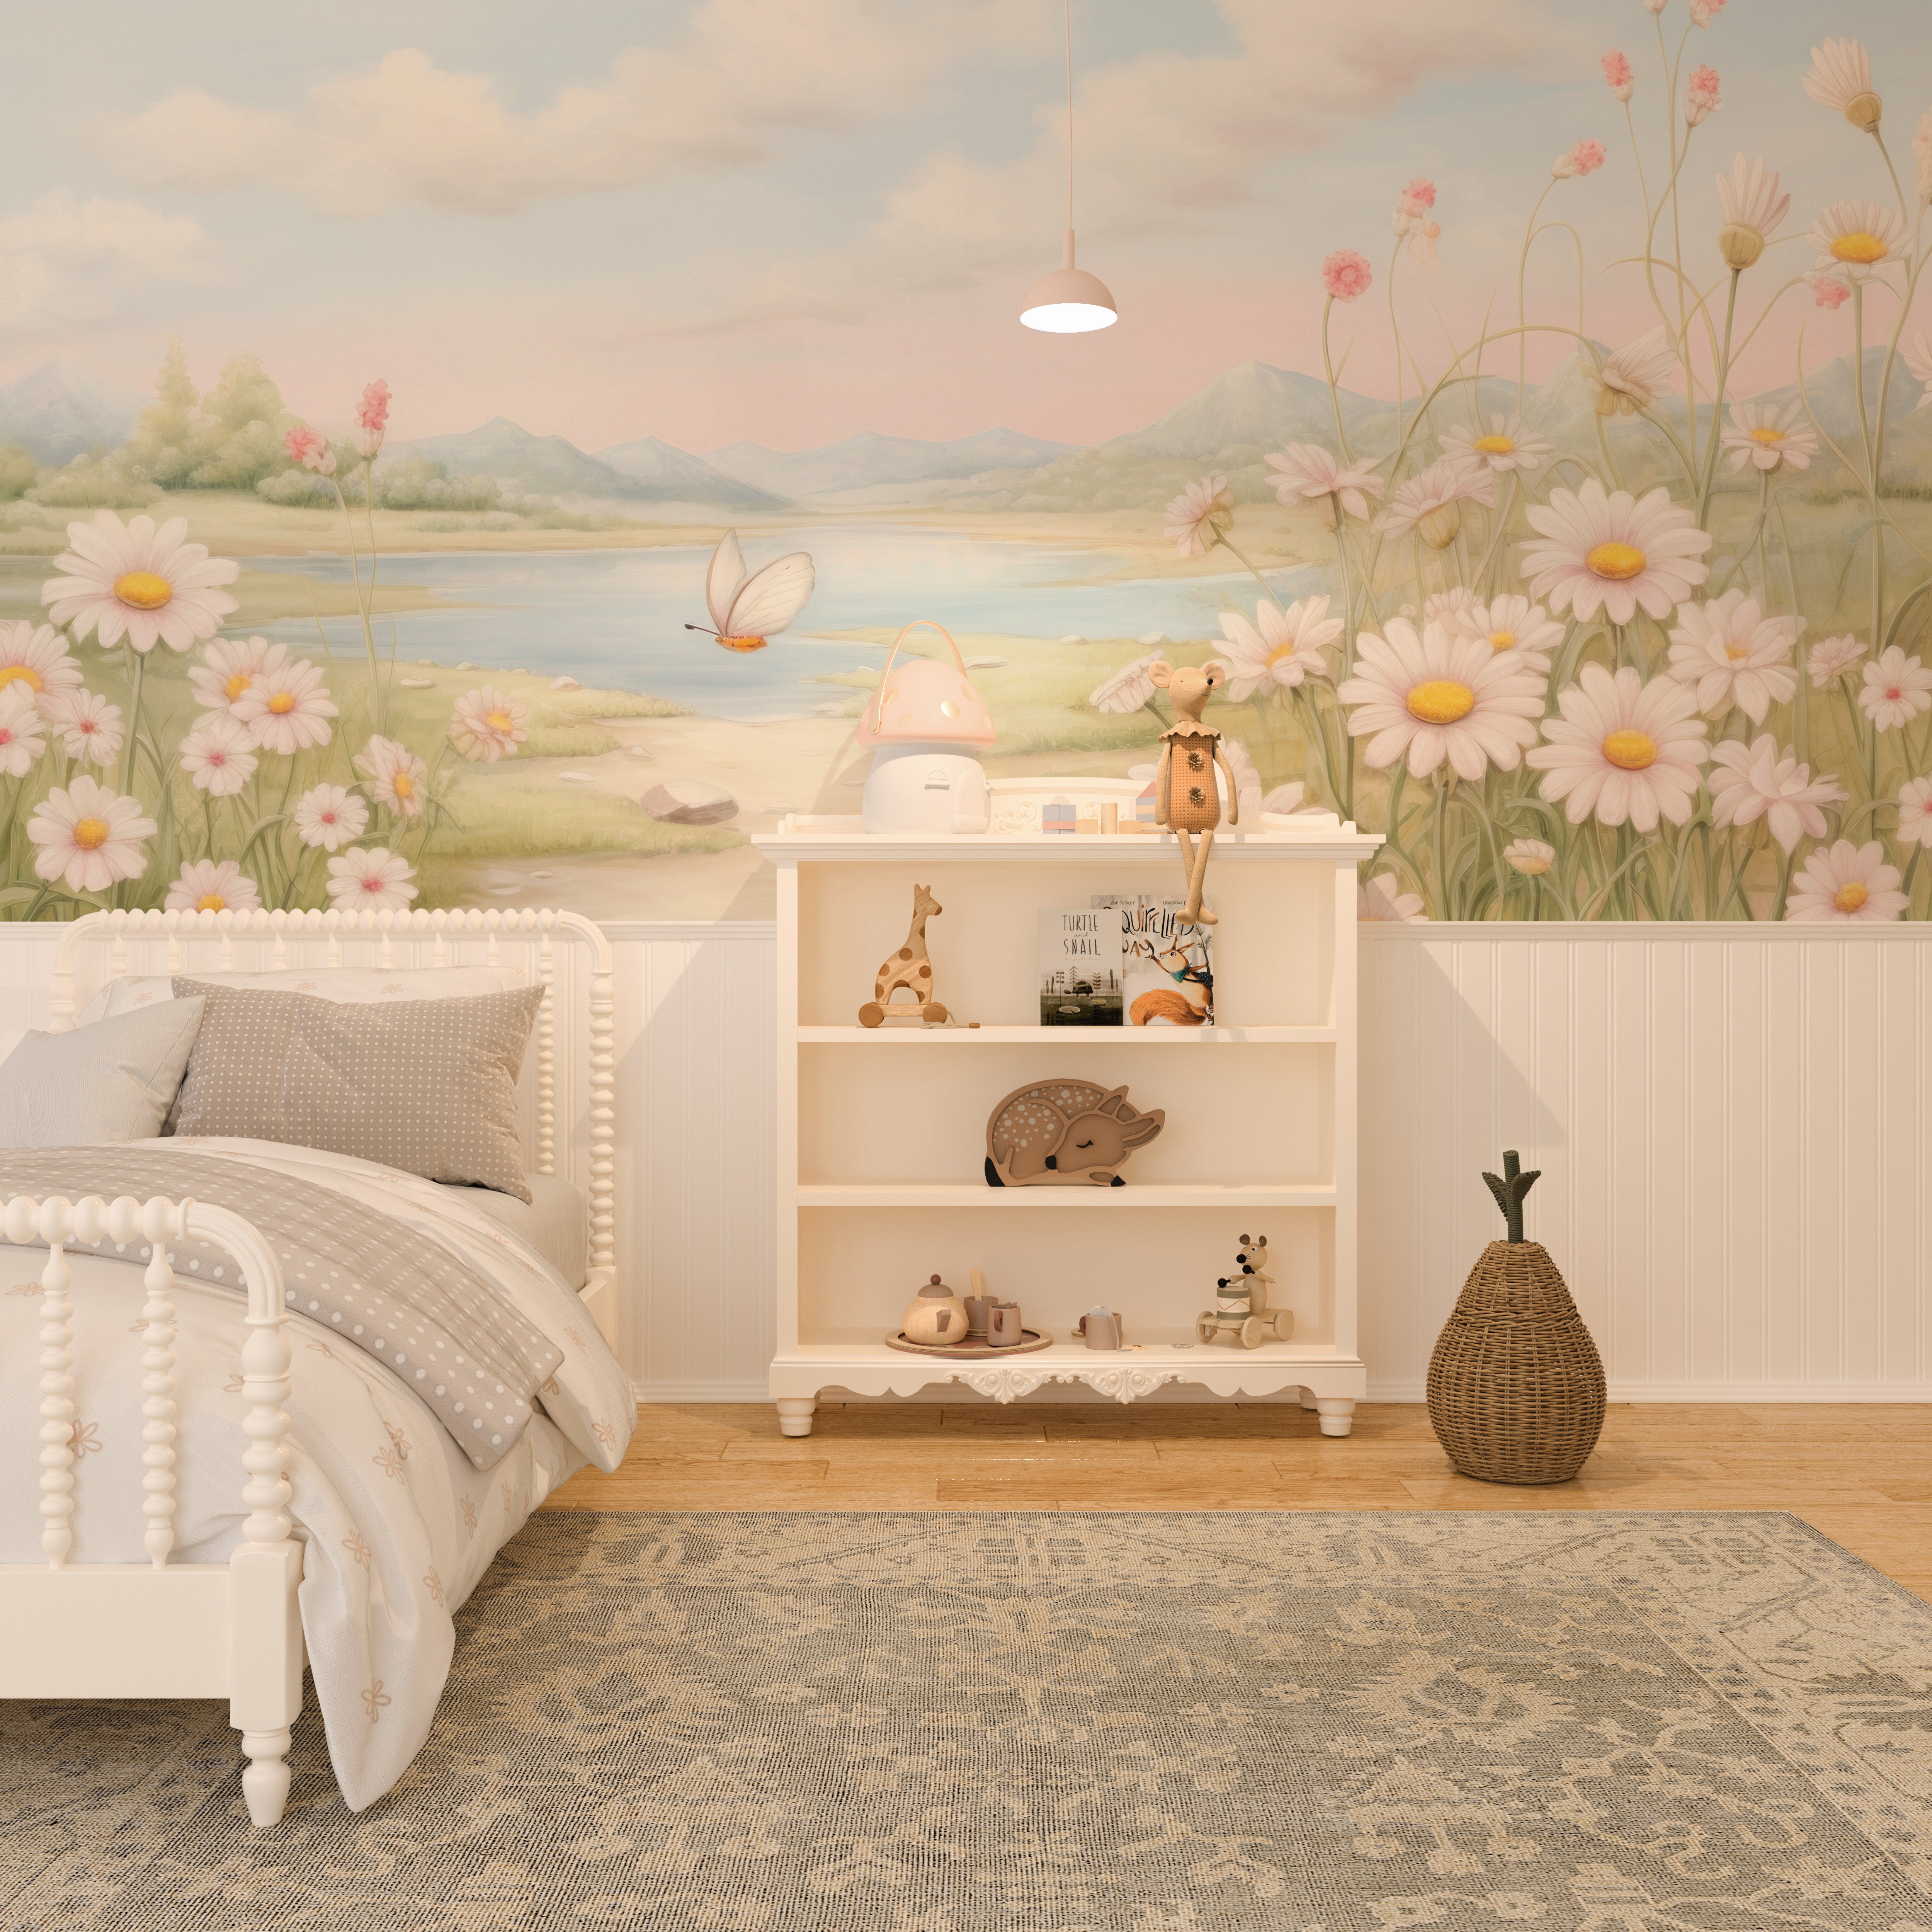 Wildflower Valley Mural on display in a bedroom setting with a white bed and rustic decor."